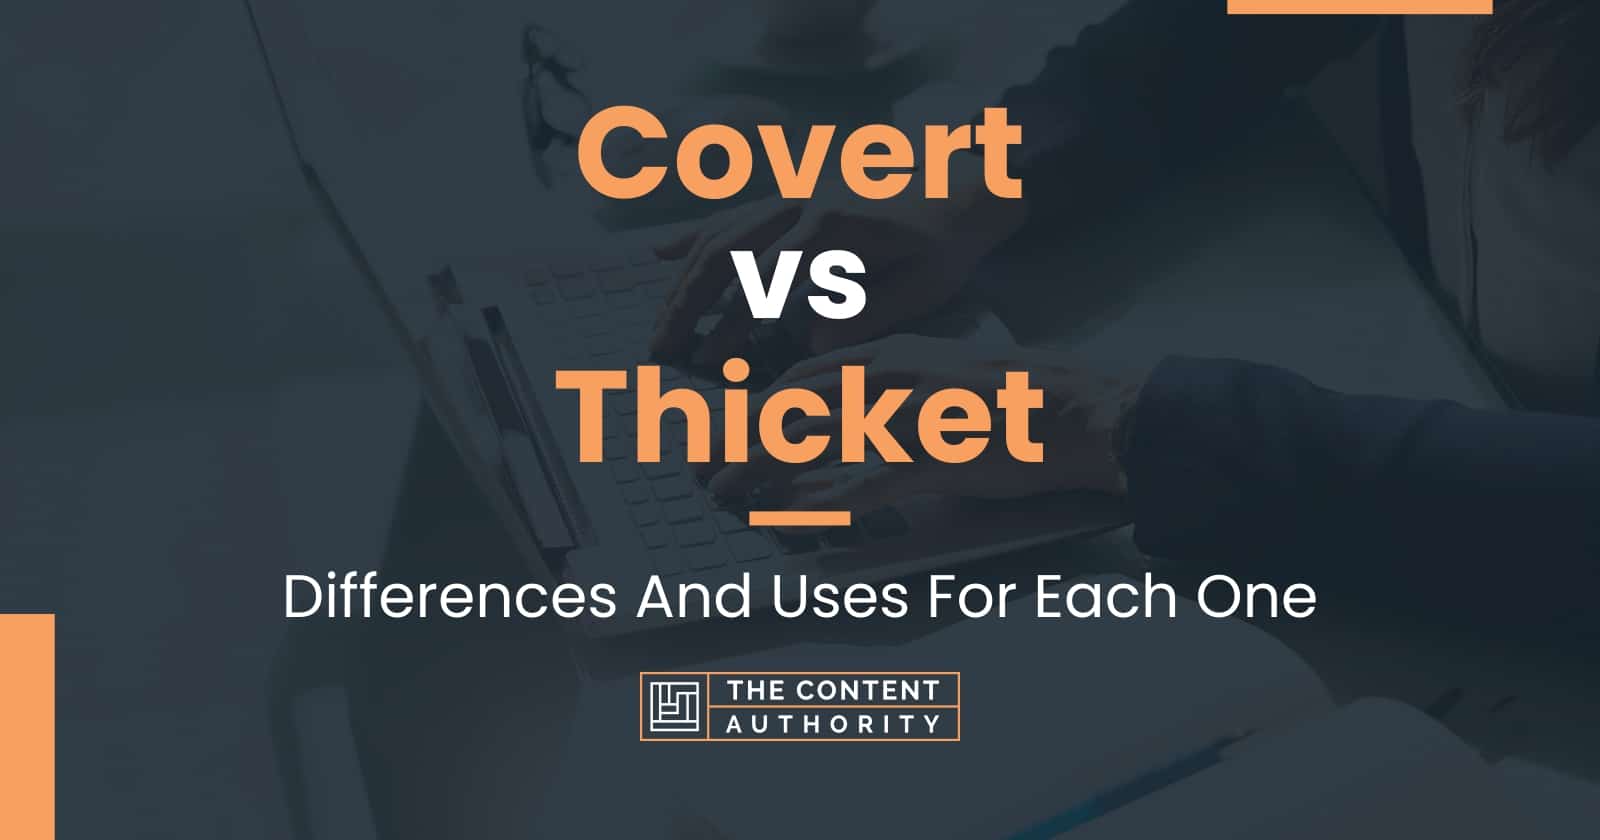 Covert vs Thicket: Differences And Uses For Each One